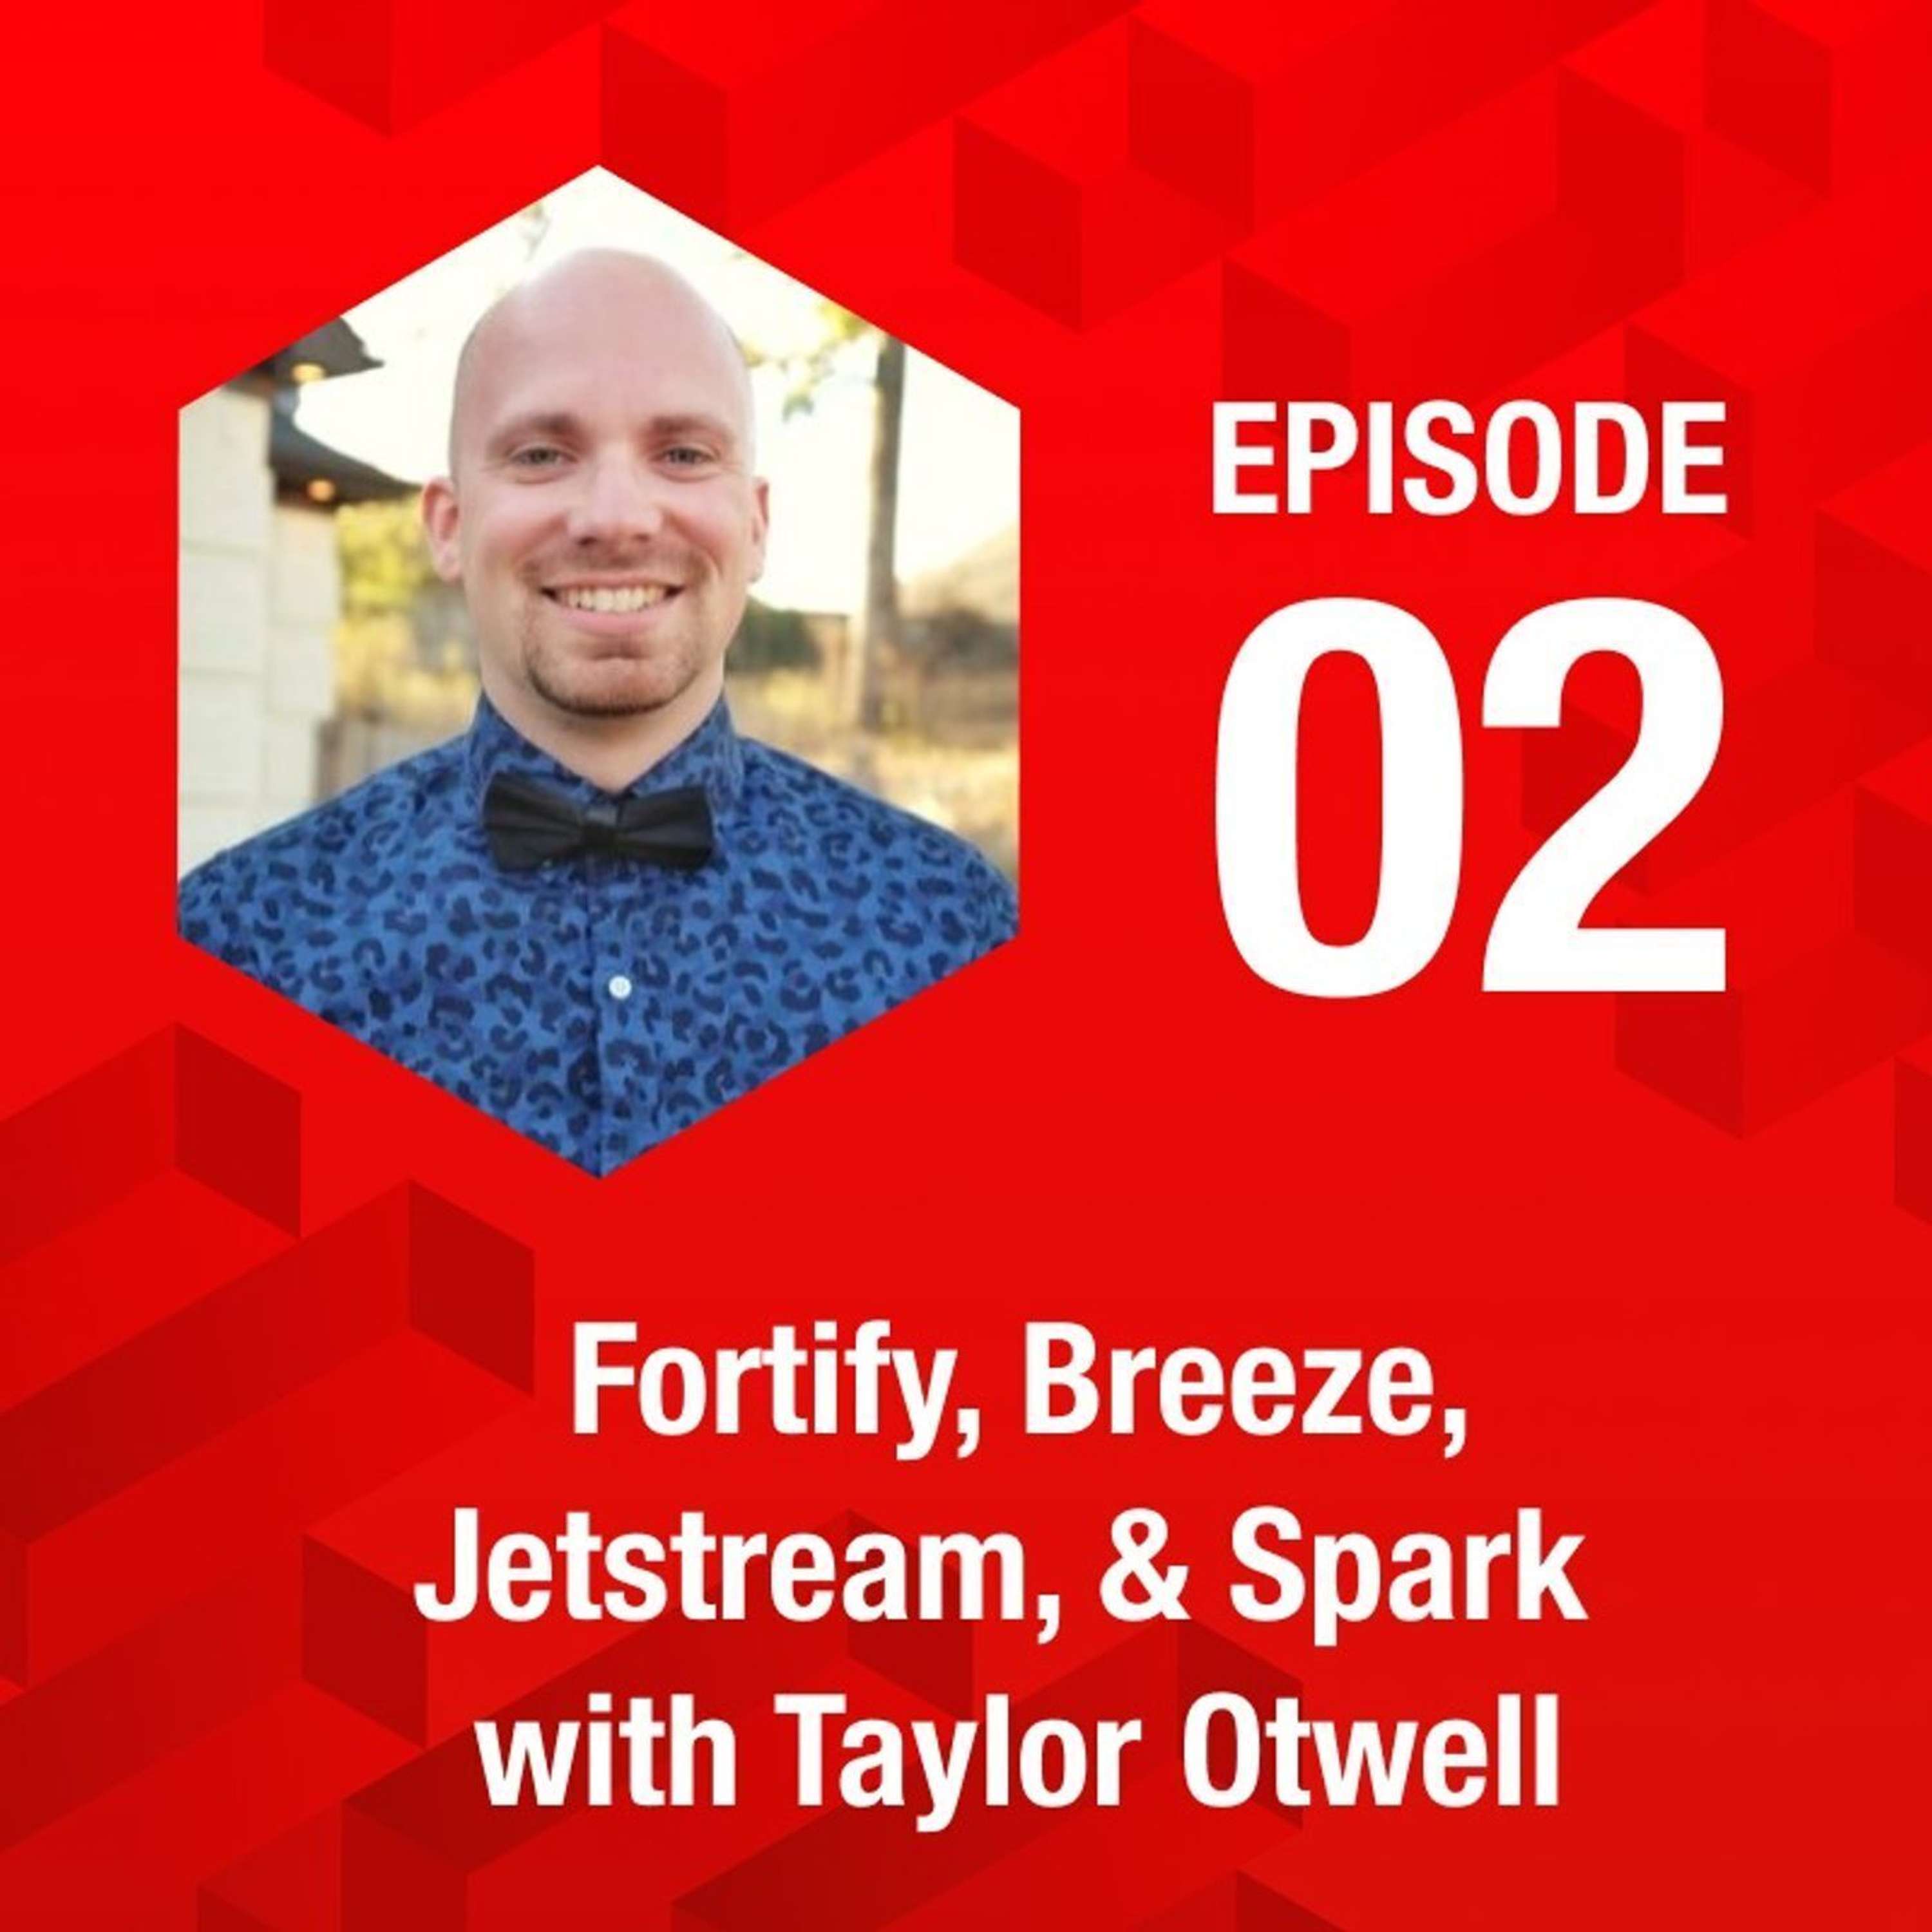 Fortify, Breeze, Jetstream, & Spark, with Taylor Otwell